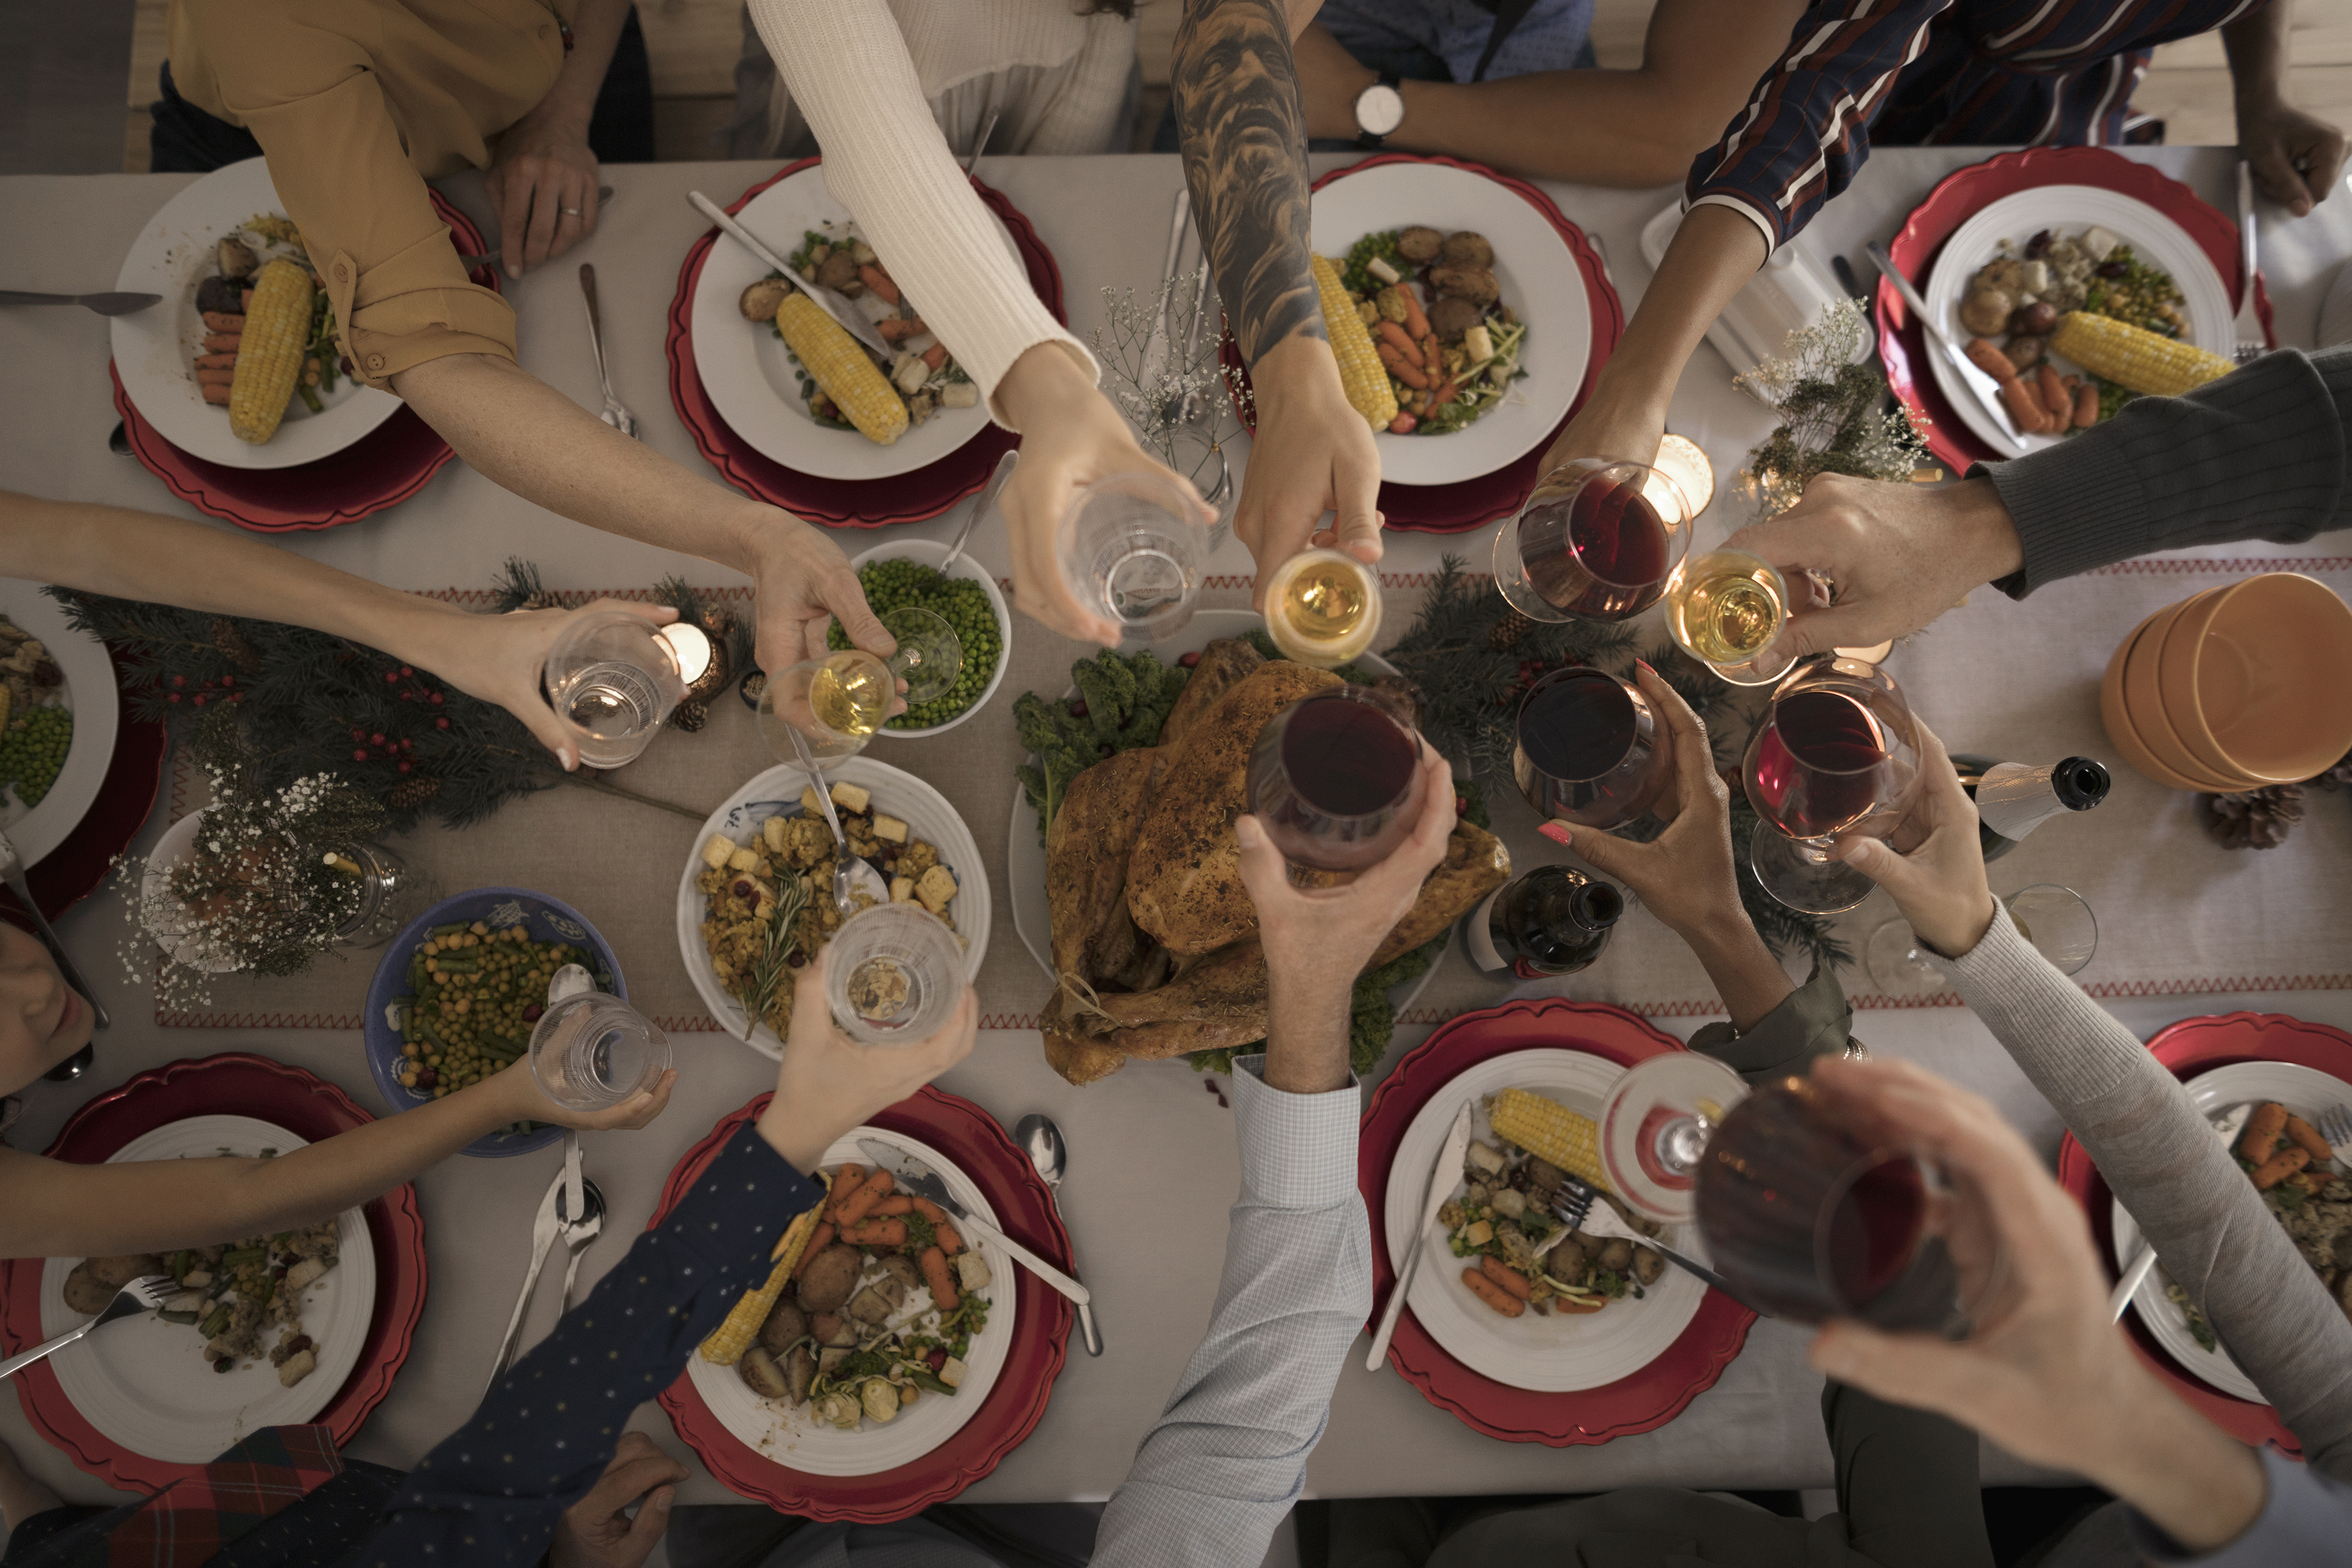 Overhead view family toasting wine glasses at candlelight Christmas turkey dinner at table. (Hero Images/Getty Images)